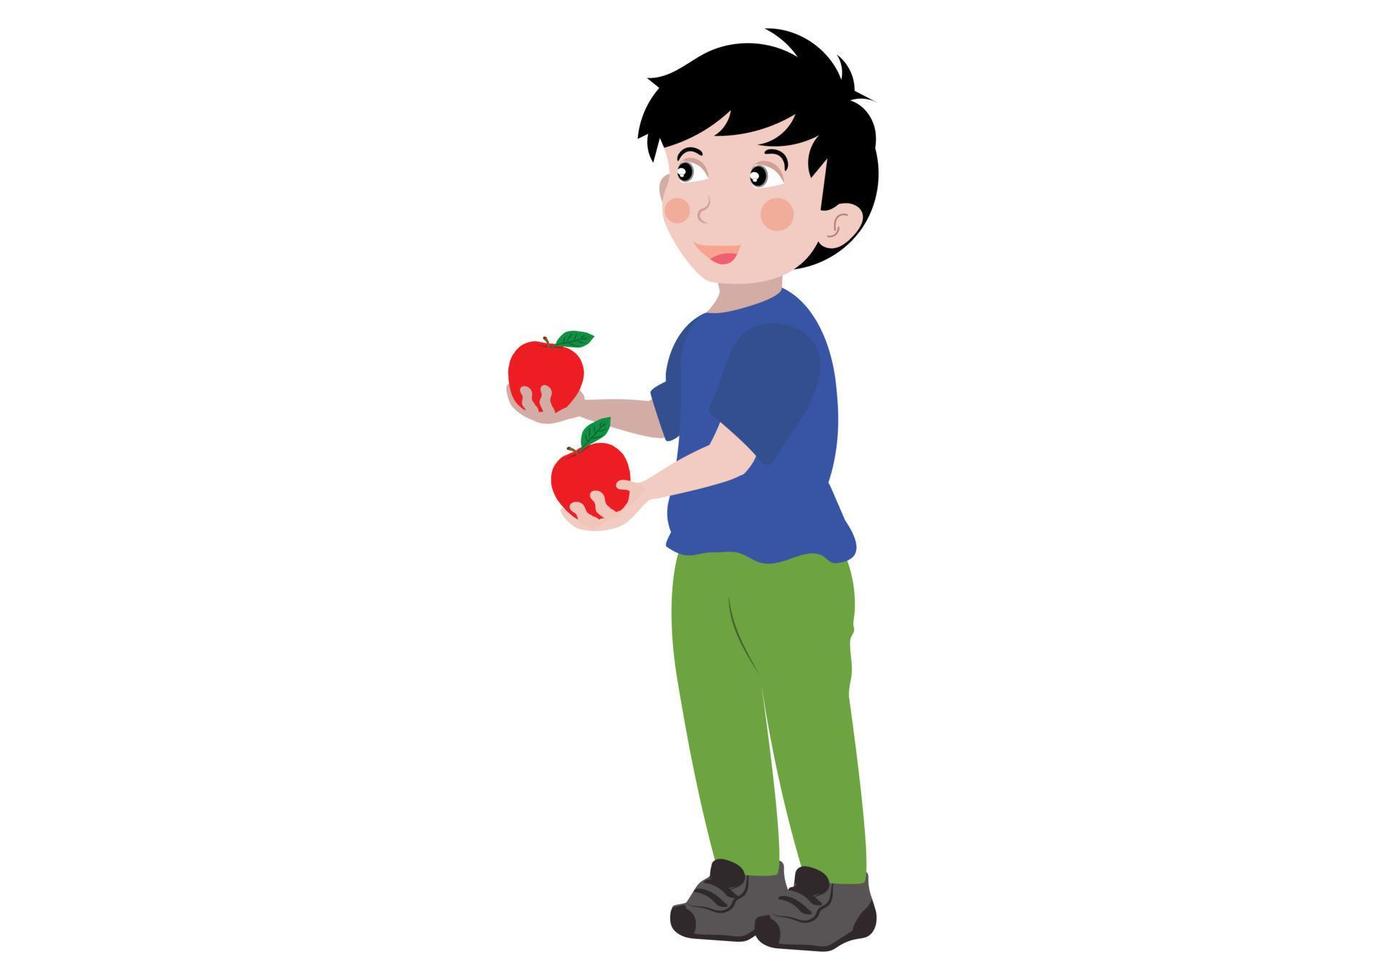 Cute Boy holds two apples in his hand vector